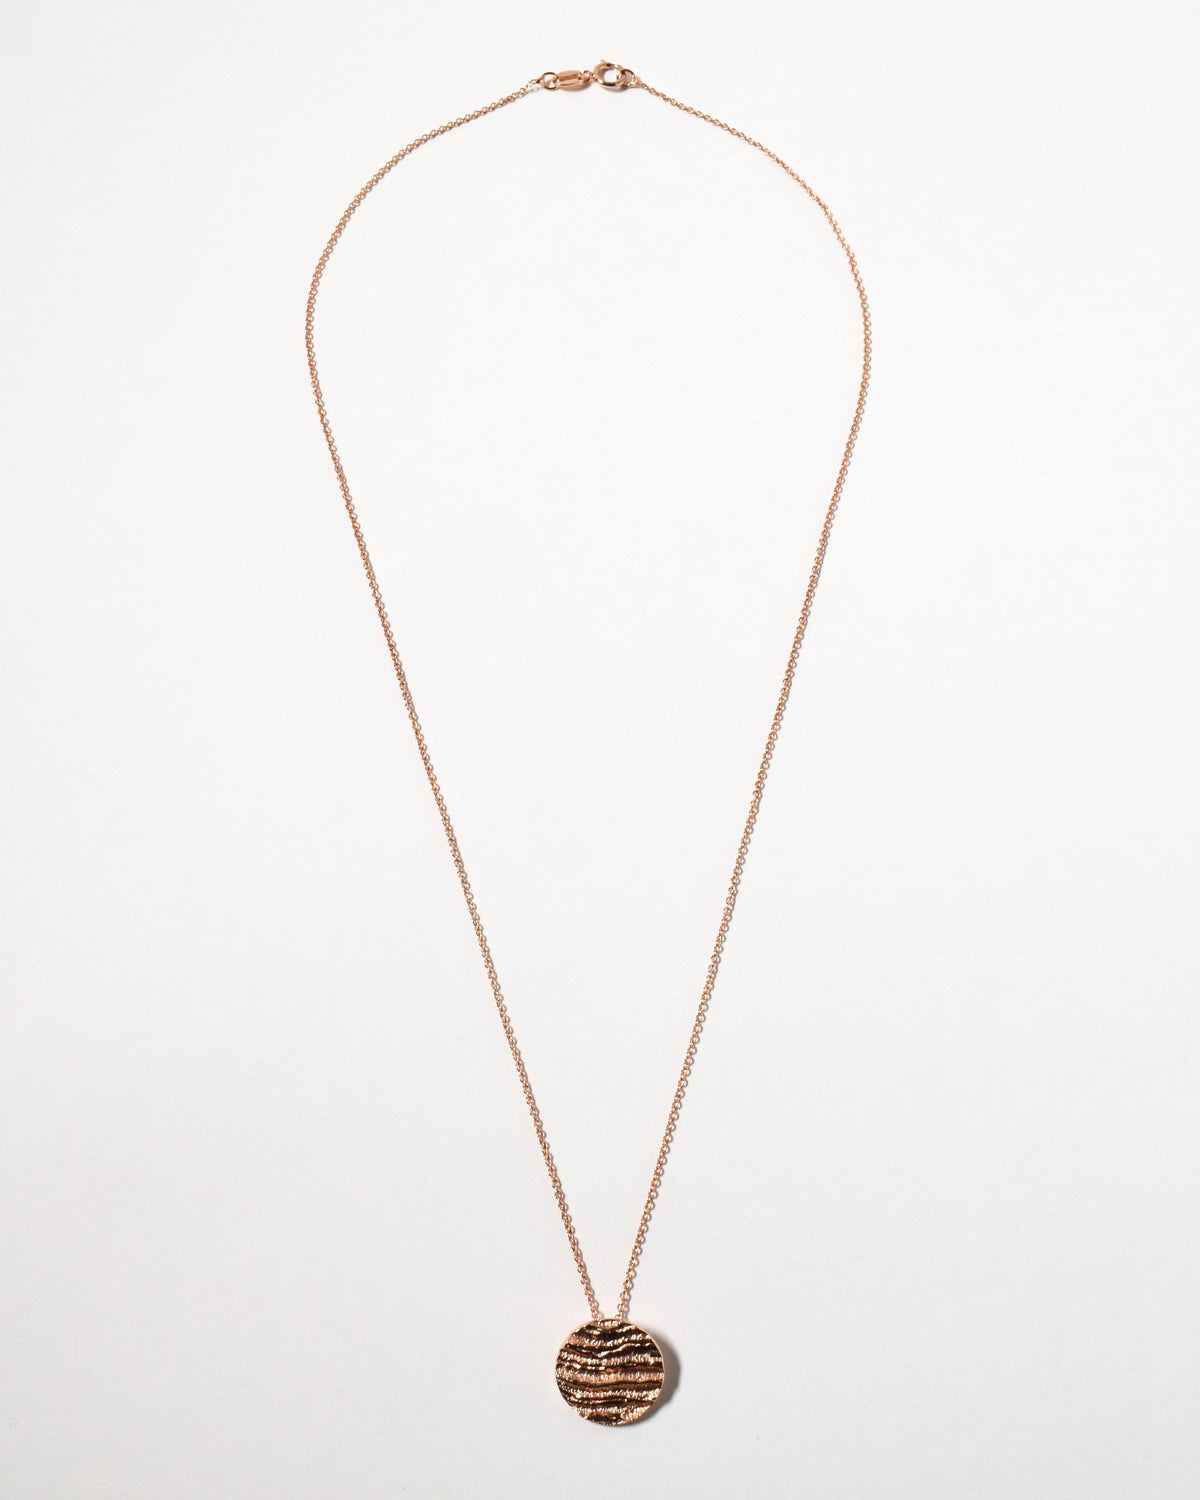 Kutti Necklace, Rose Gold Plated